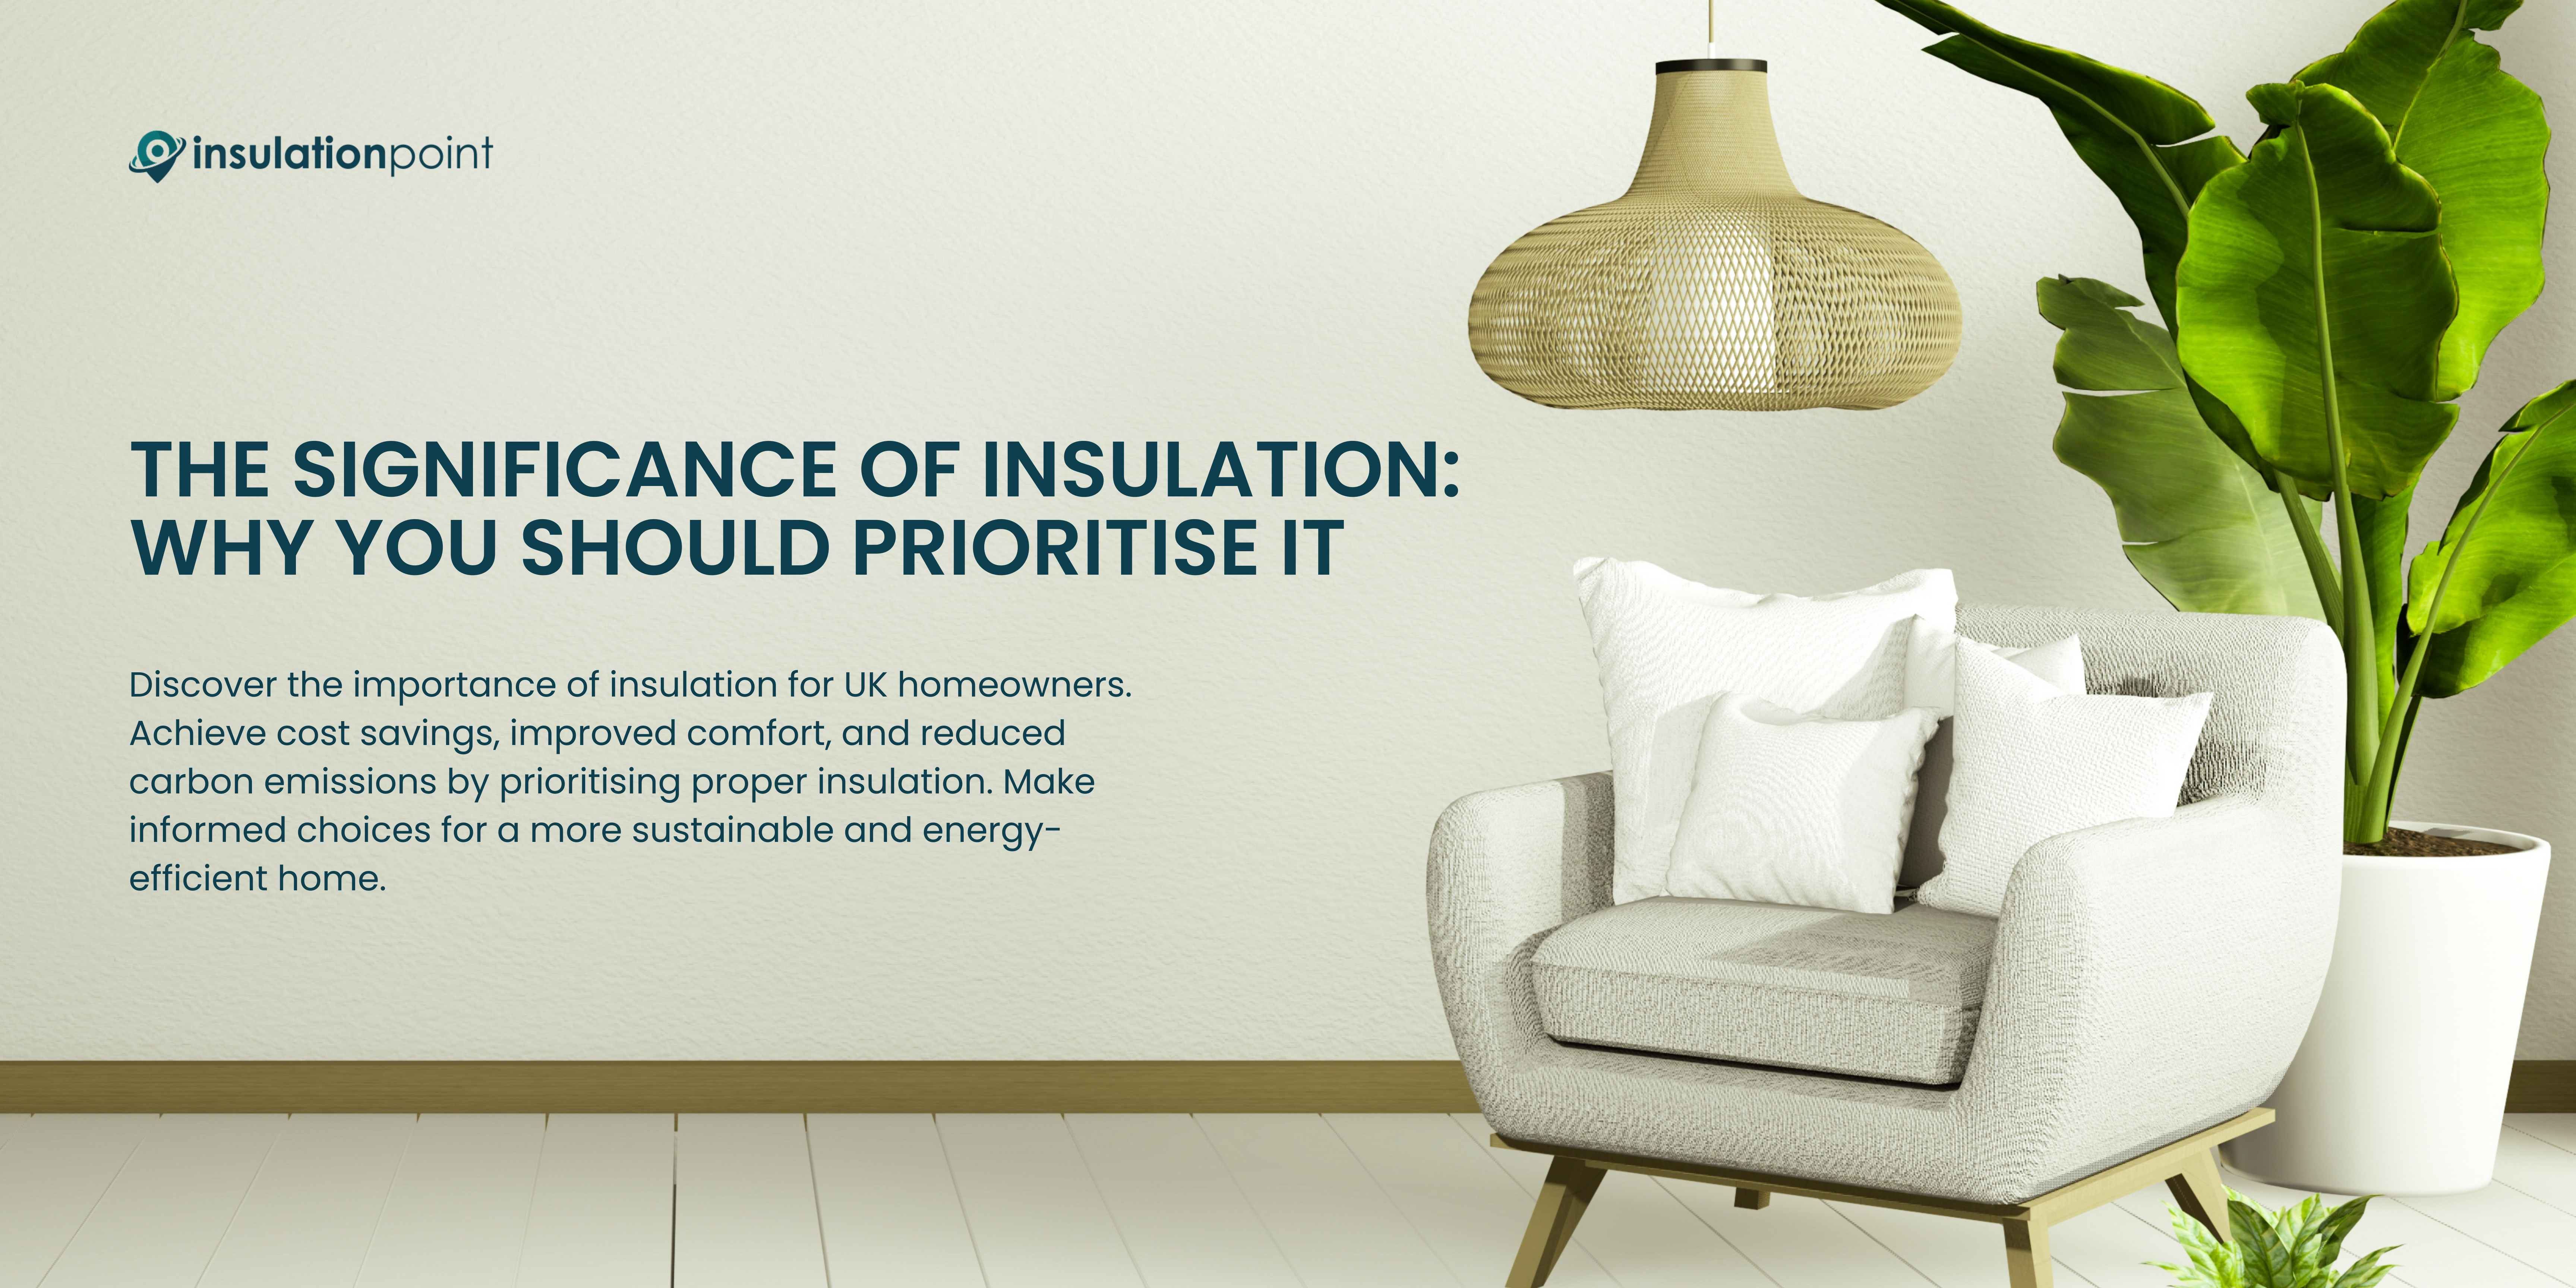 The Significance of Insulation: Why You Should Prioritise It